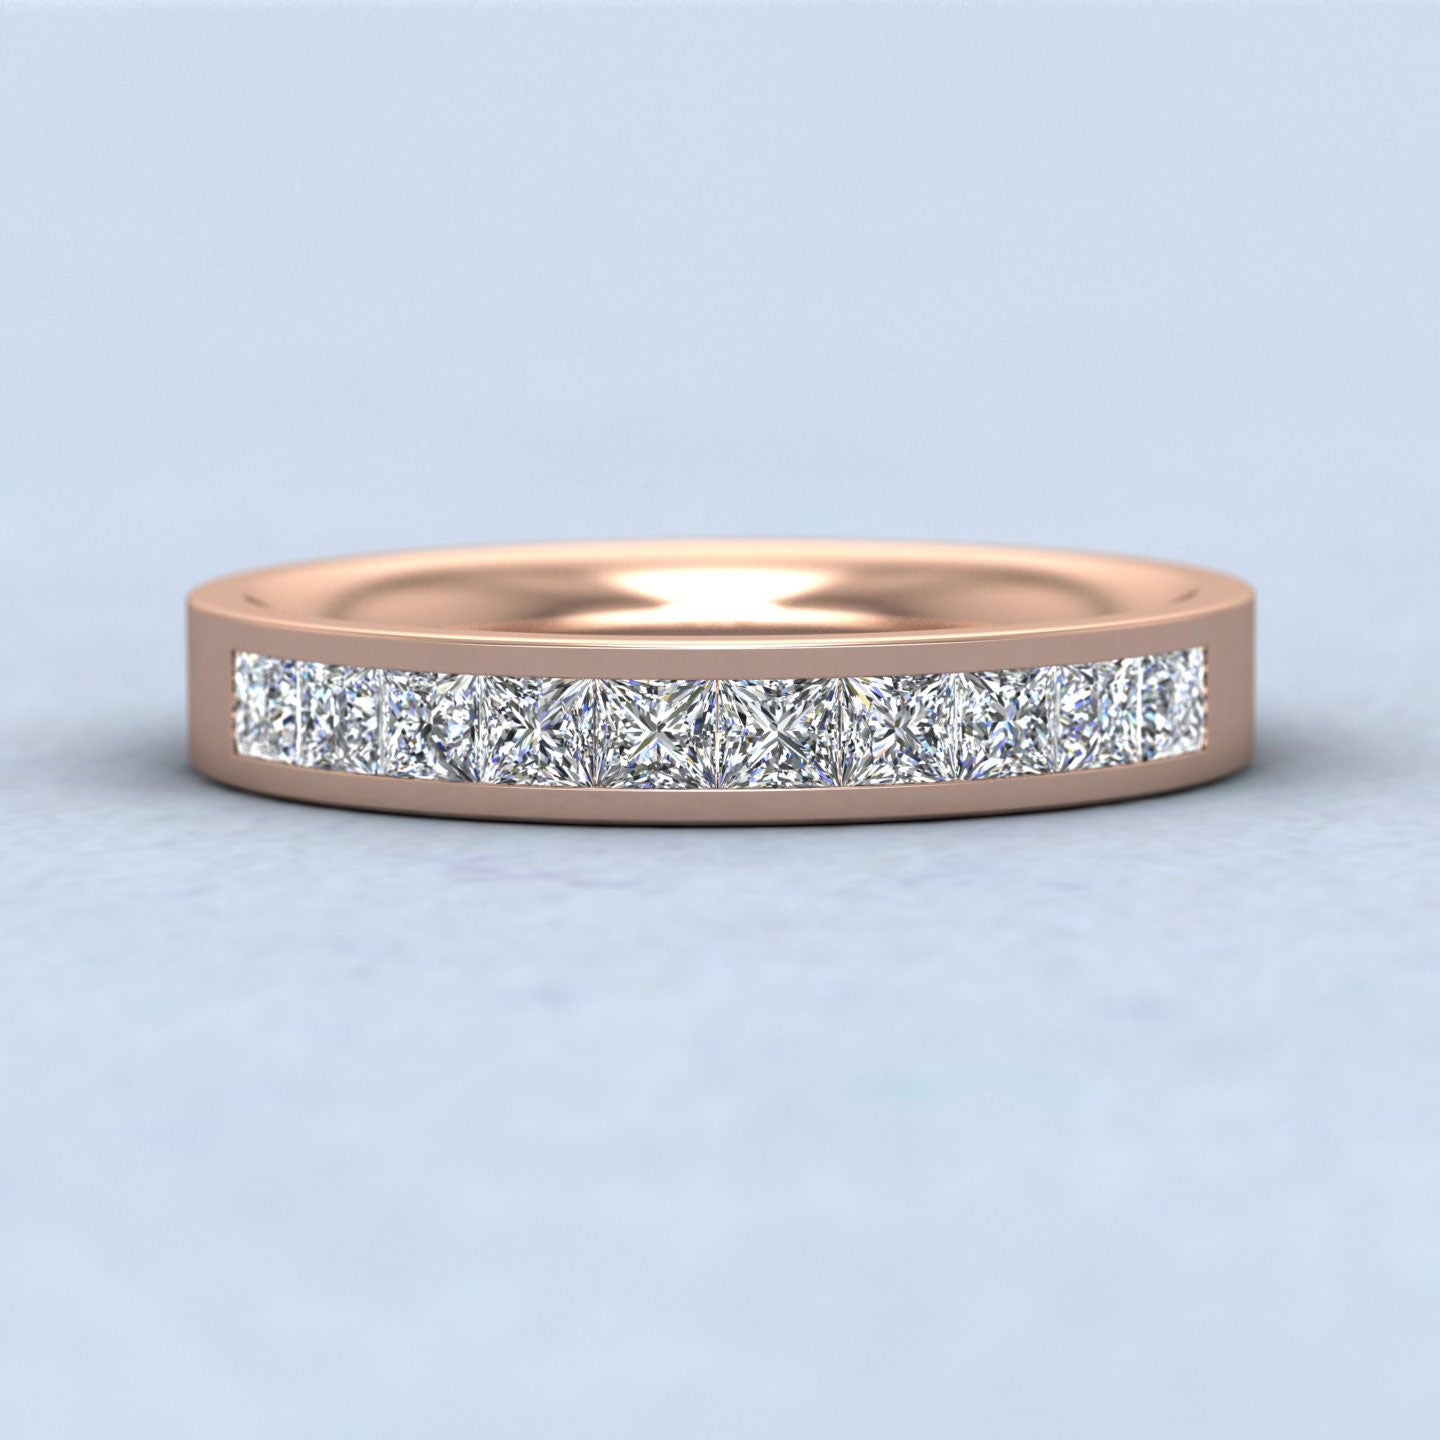 Princess Cut 10 Diamond 0.75ct Channel Set Ring In 18ct Rose Gold. 3.5mm Wide